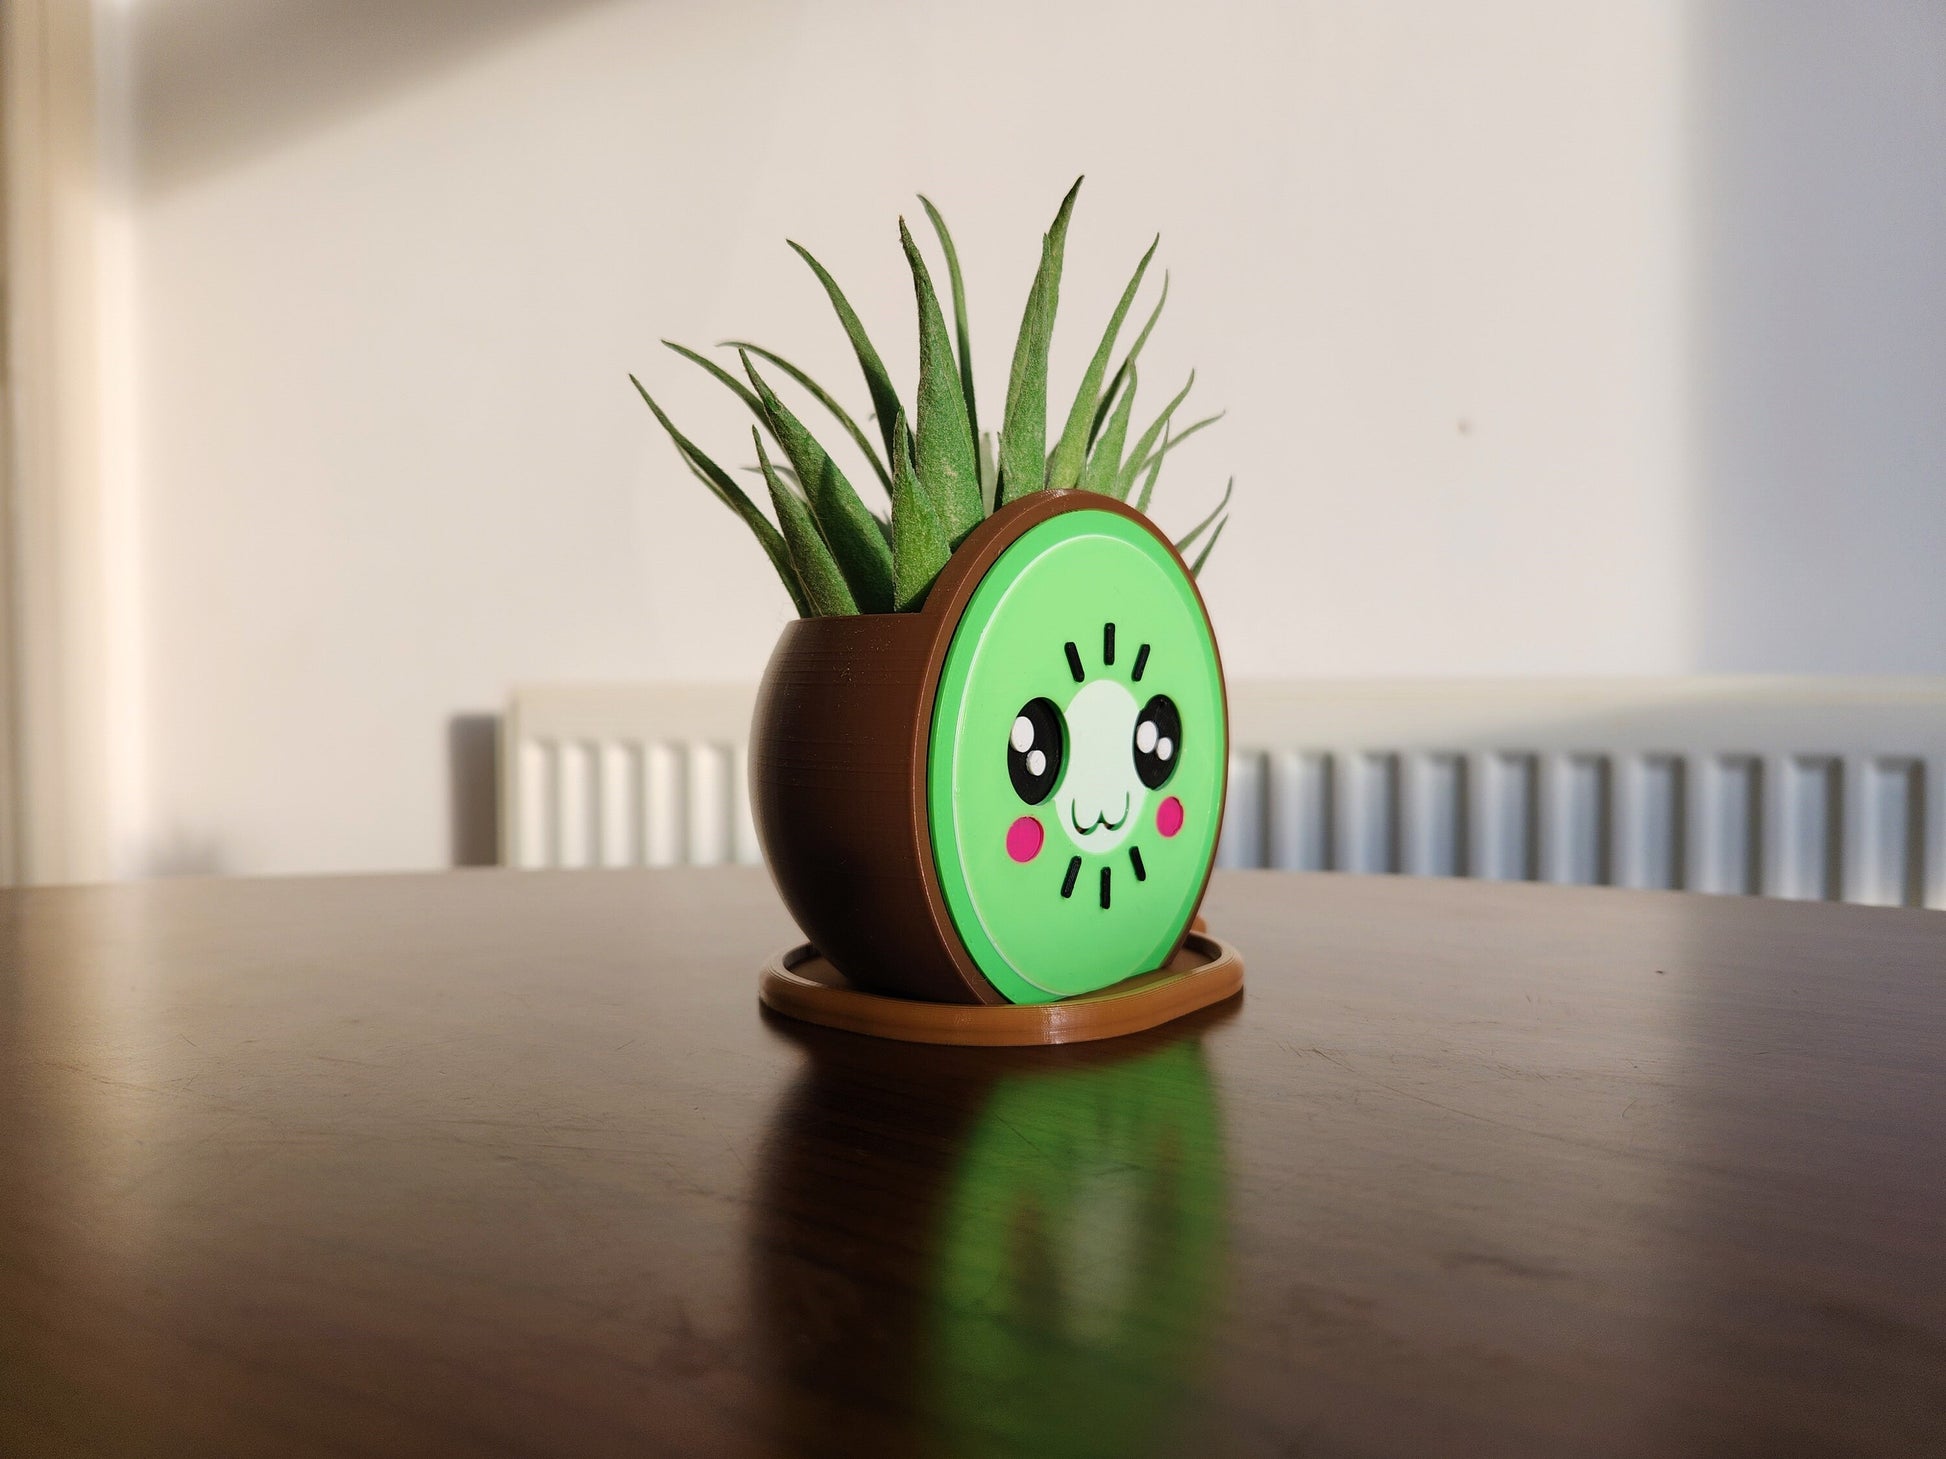 Kawaii Kiwi Flower Pot - Unique and Quirky Plant Home